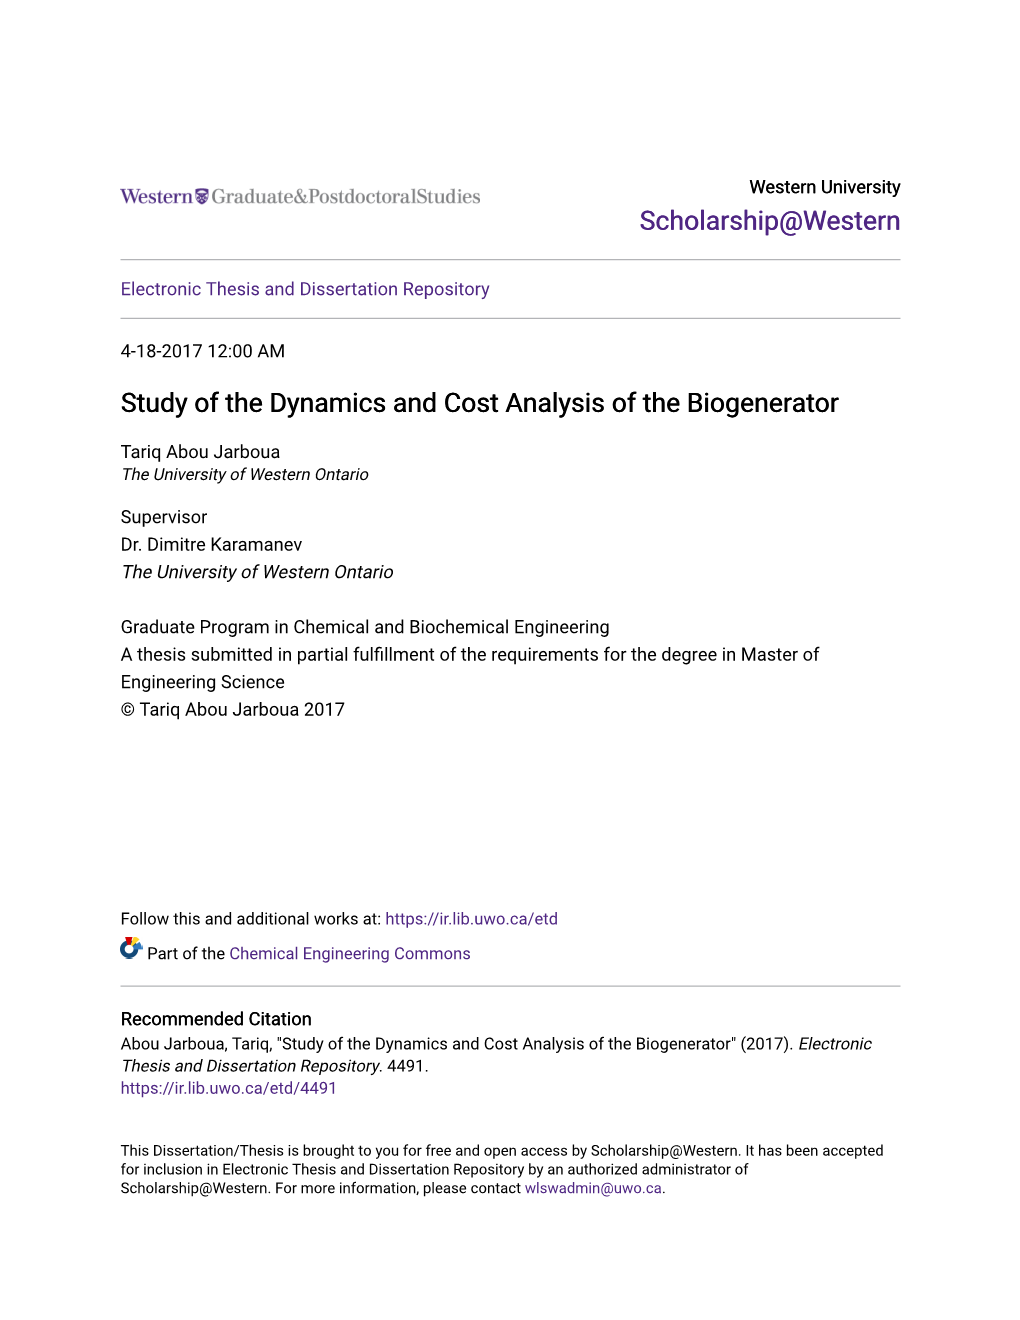 Study of the Dynamics and Cost Analysis of the Biogenerator